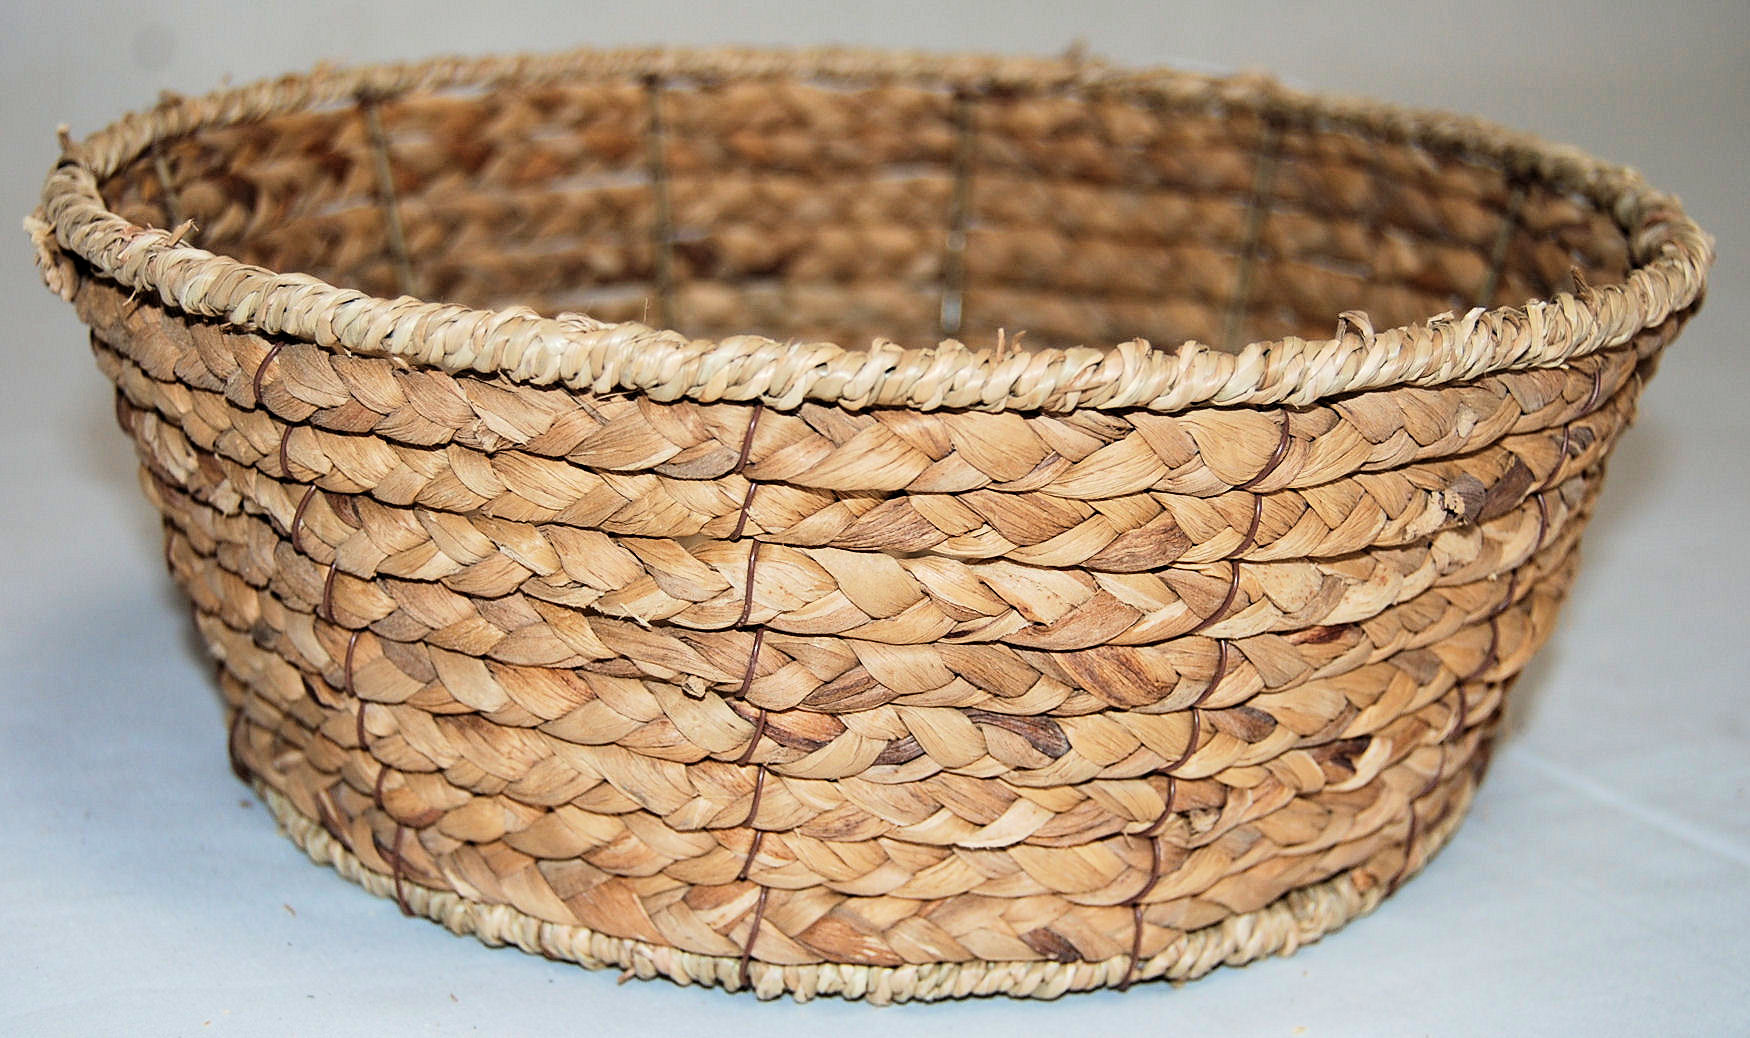 Seagrass and Water Hyacinth Round Basket | Asia Resources Merchandising ...